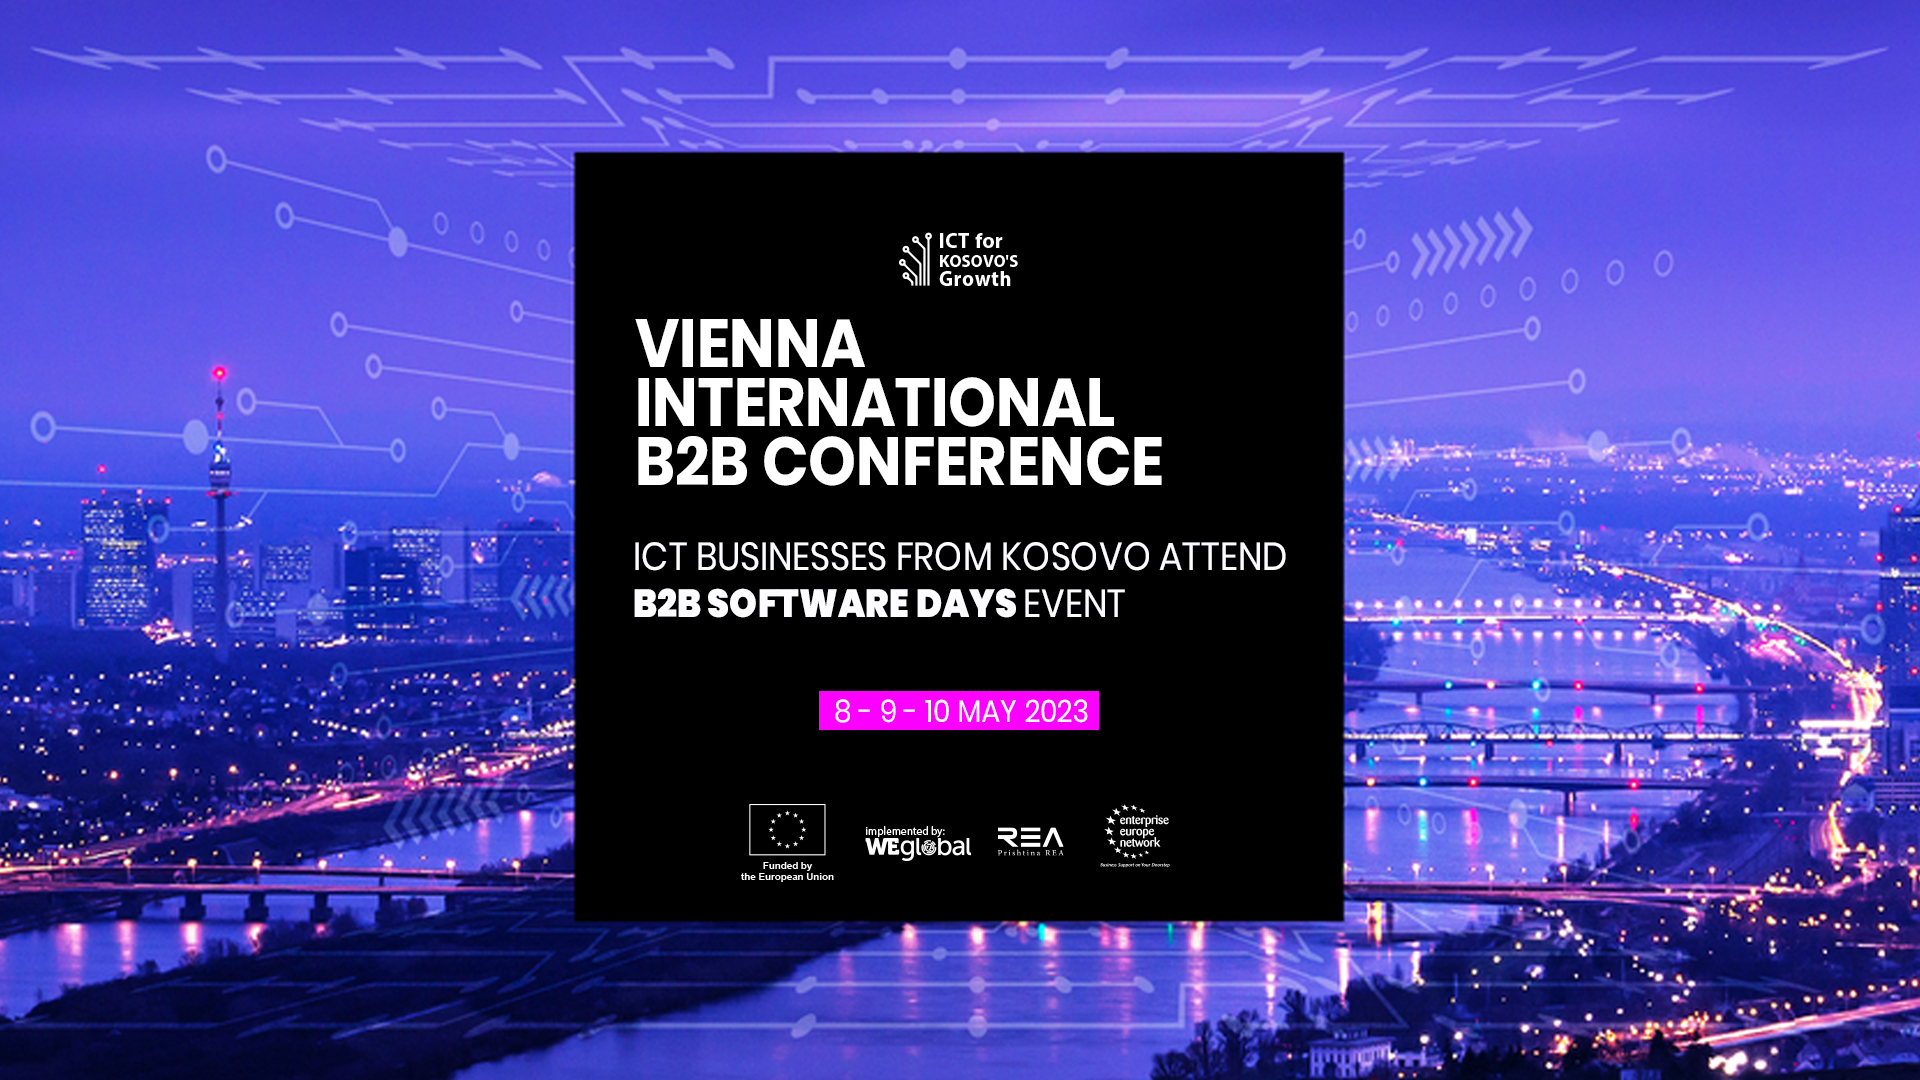 International B2B Matchmaking Event – Software-oriented ICT businesses from Kosovo meet Austrian and International Software-based Businesses in Vienna/ 08-10 May 2023